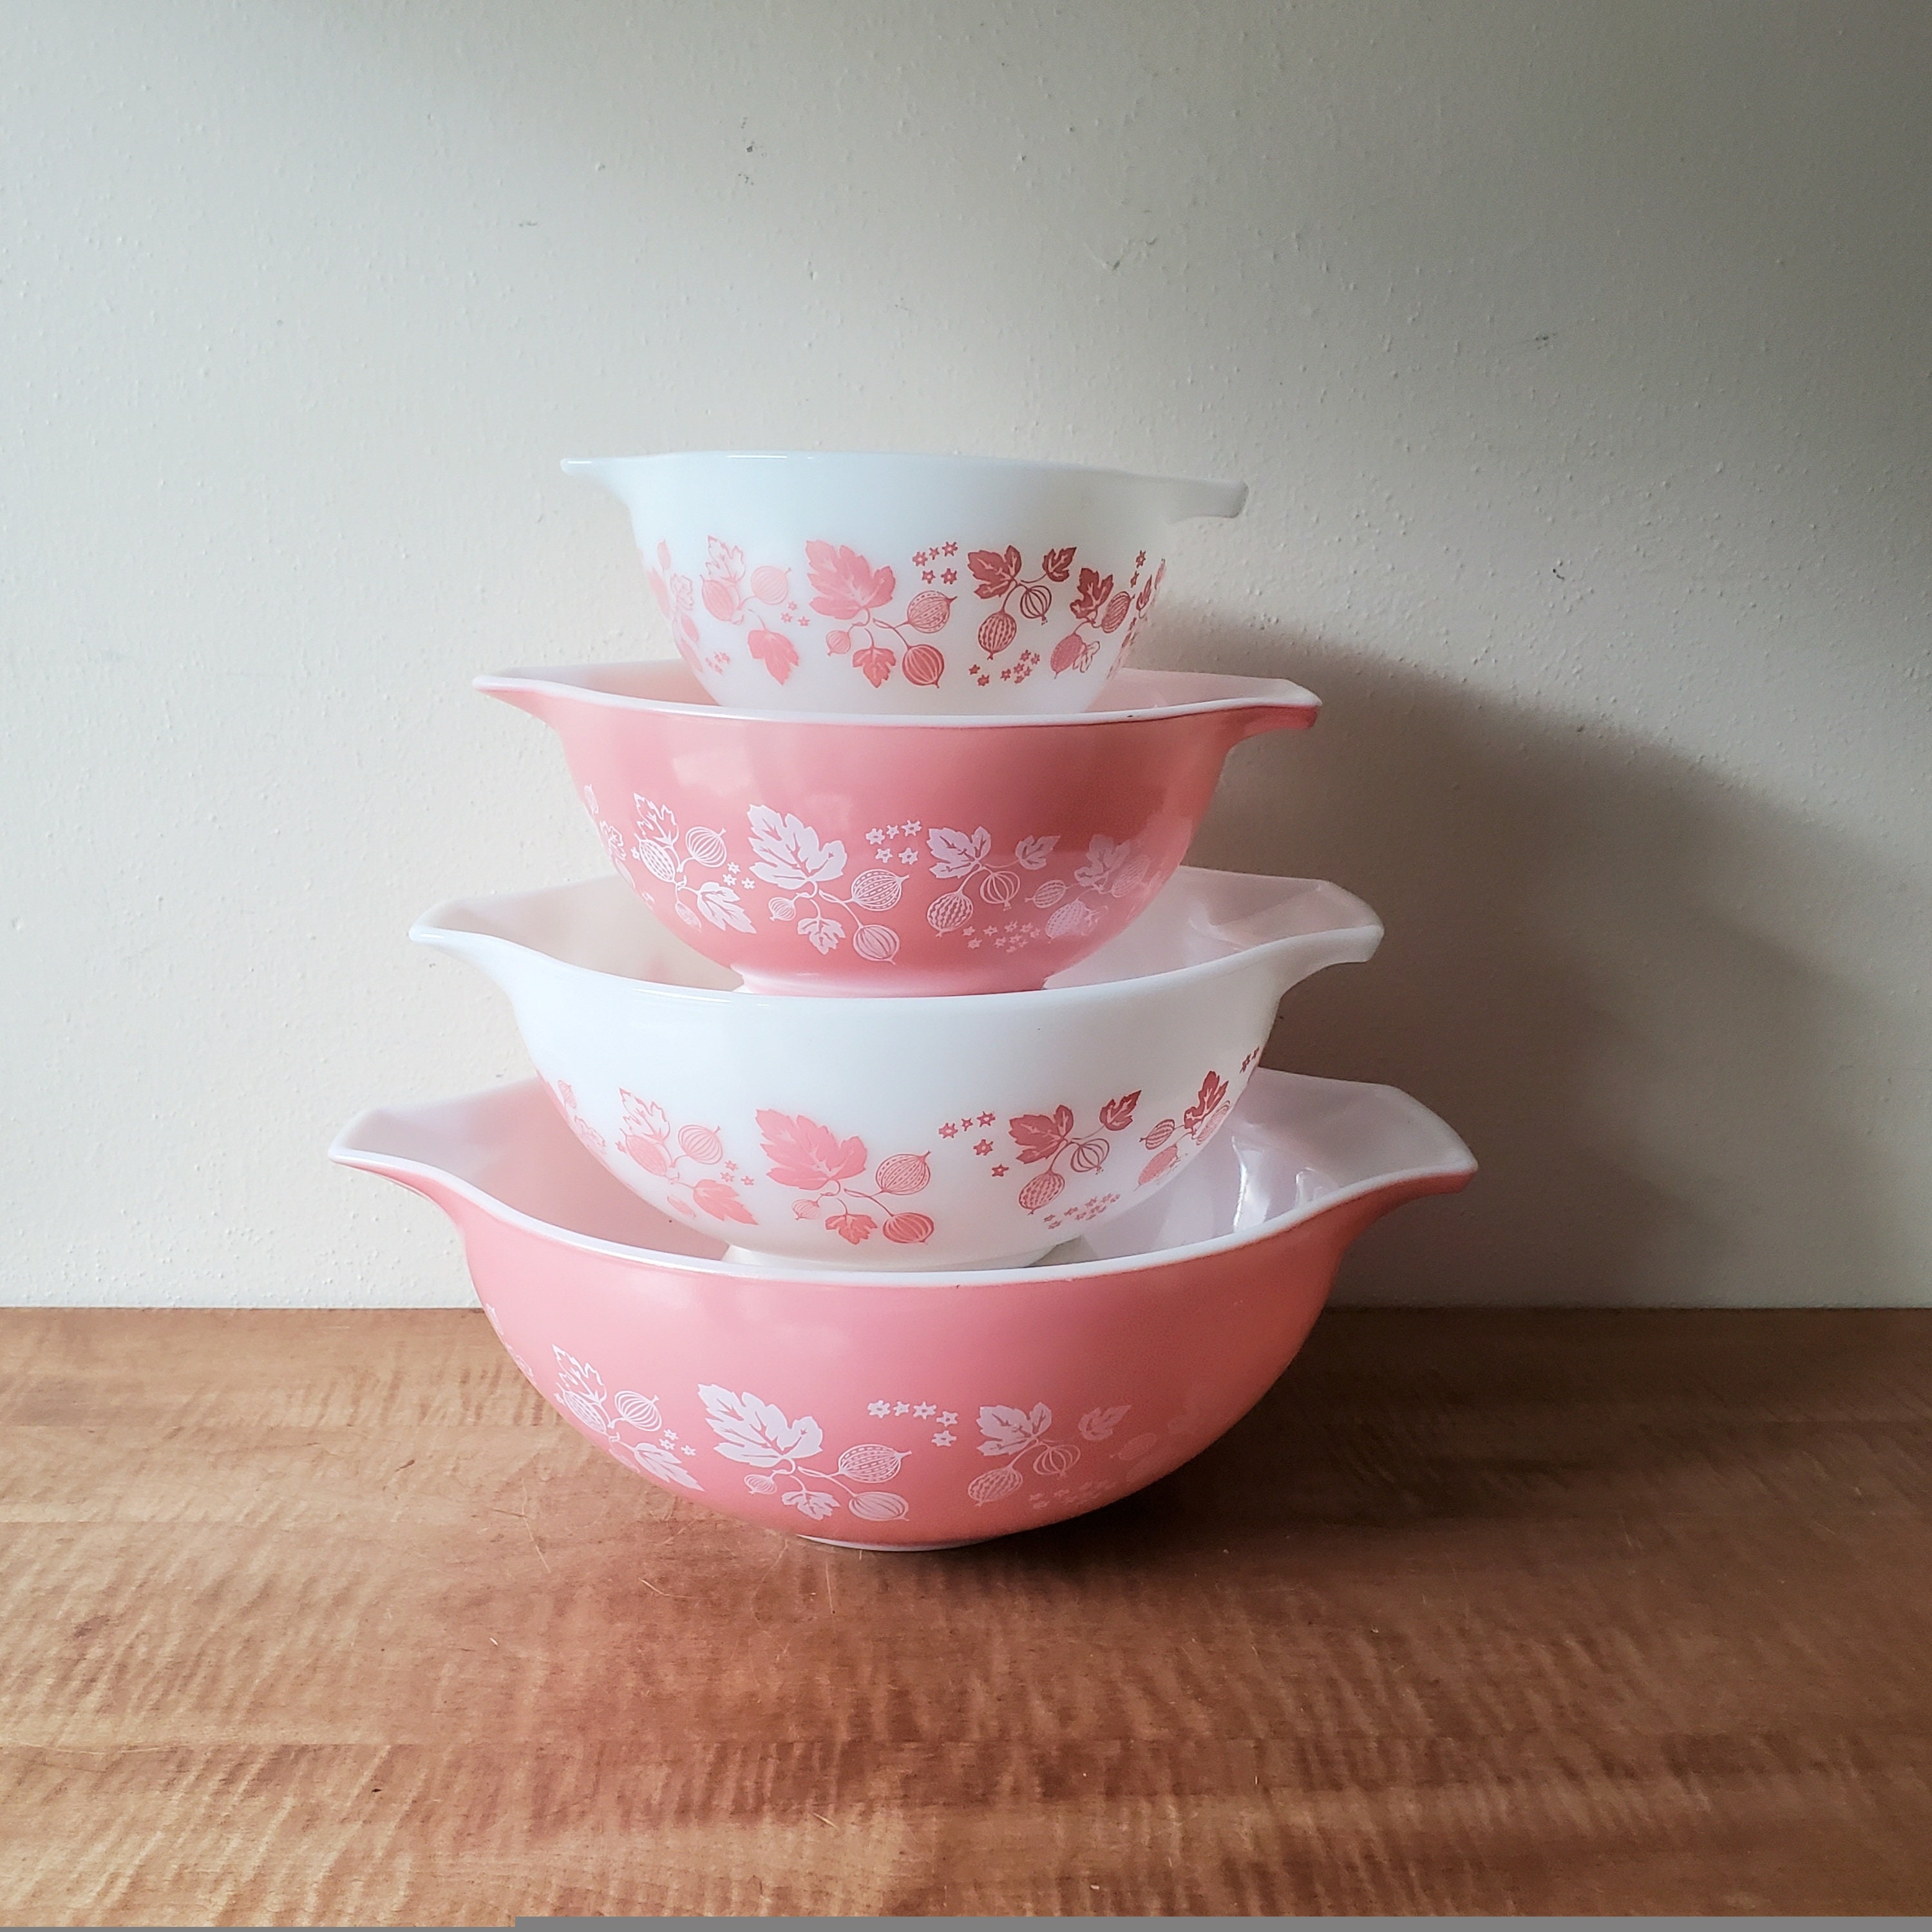 My Home and Garden: Pink Gooseberry Pyrex. My ultimate find.